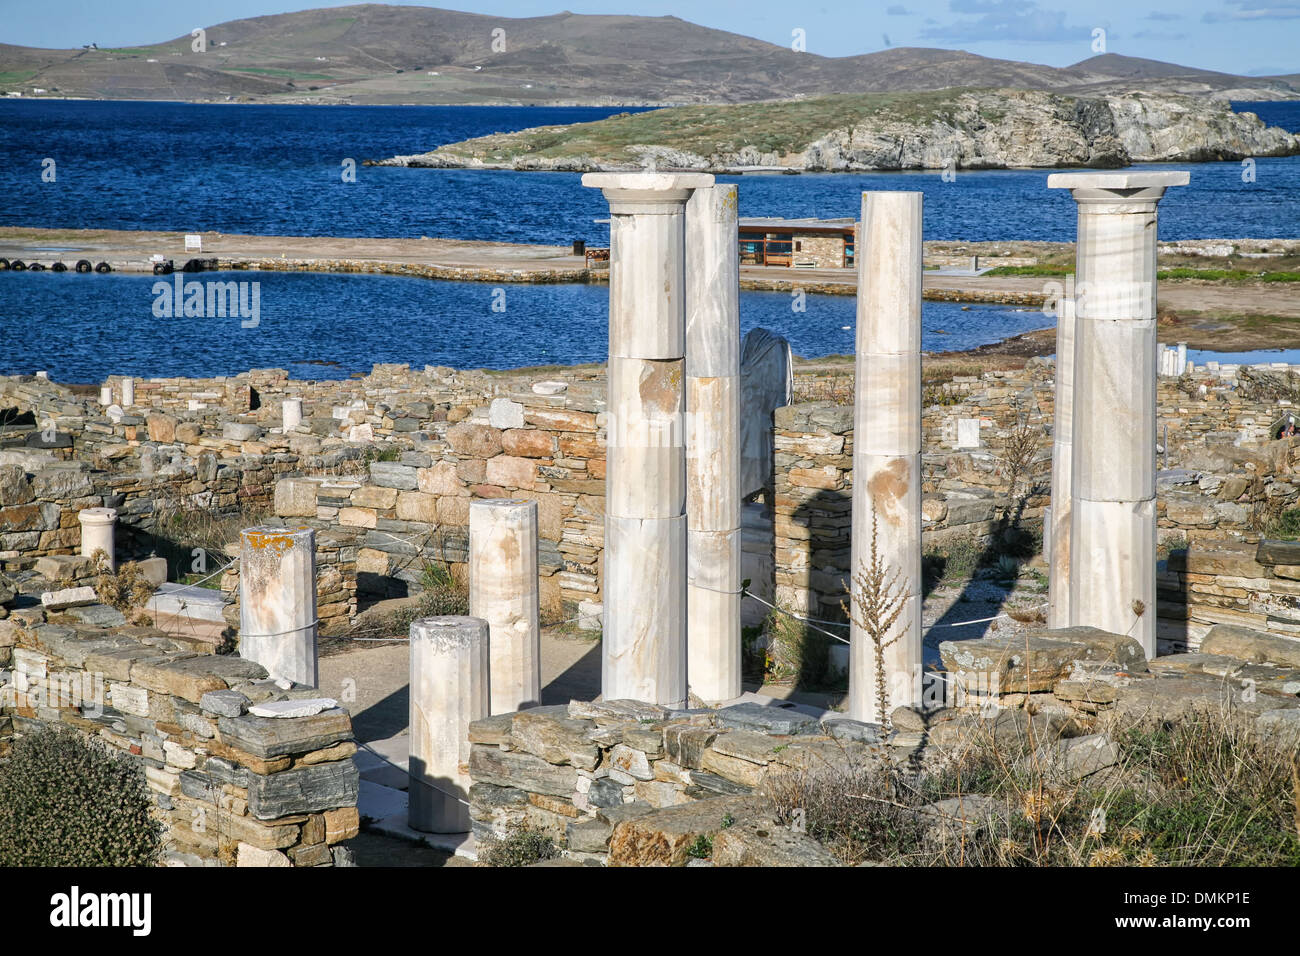 View overlooking 'Cleopatra's House' and the ruins of Delos, the historic Greek island. Stock Photo